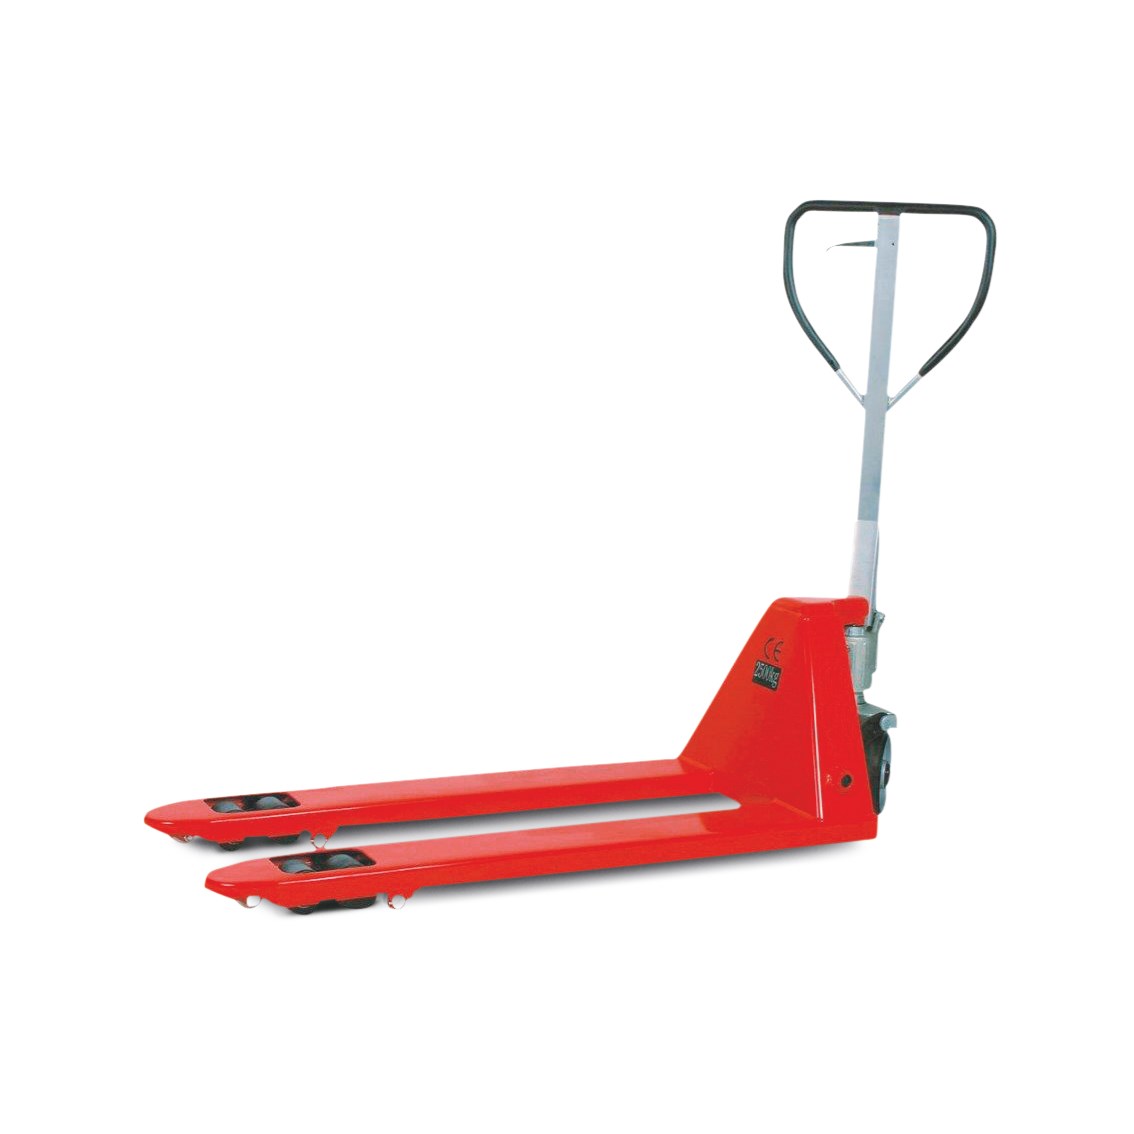 Pallet truck with high performance hydraulic pump